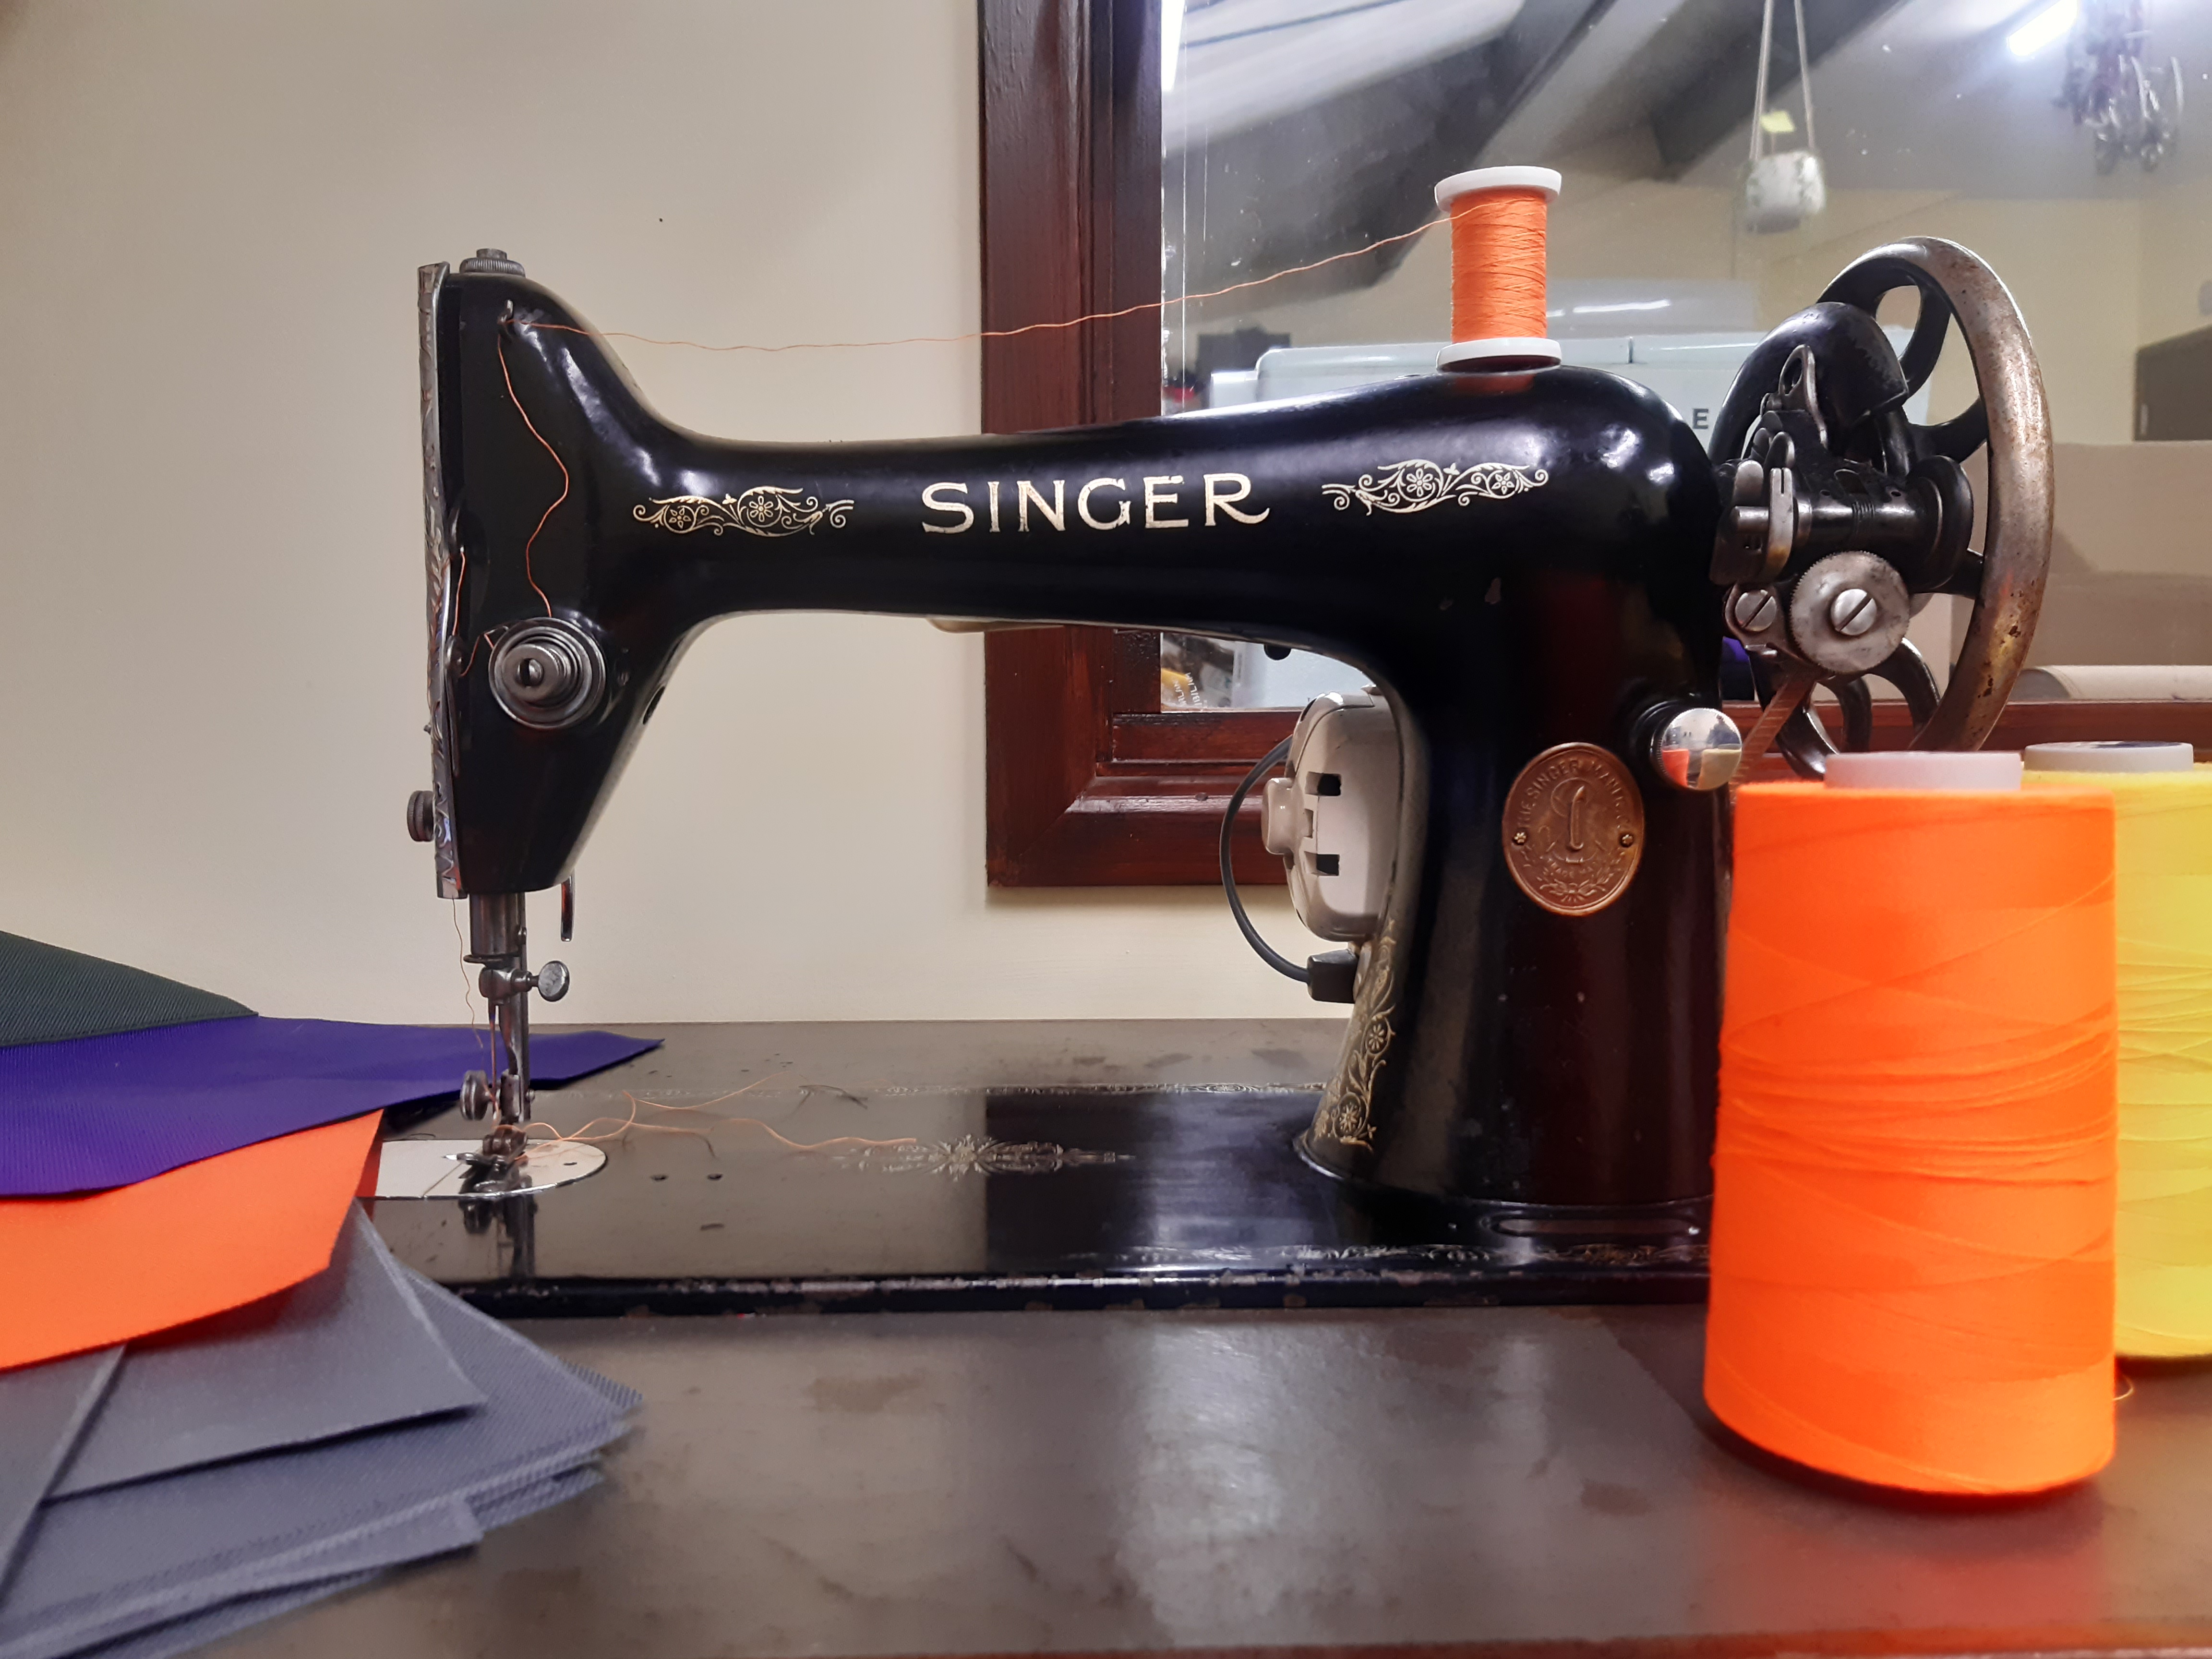 Dirtbags Climbing: How to thread a sewing machine. sustainibility community